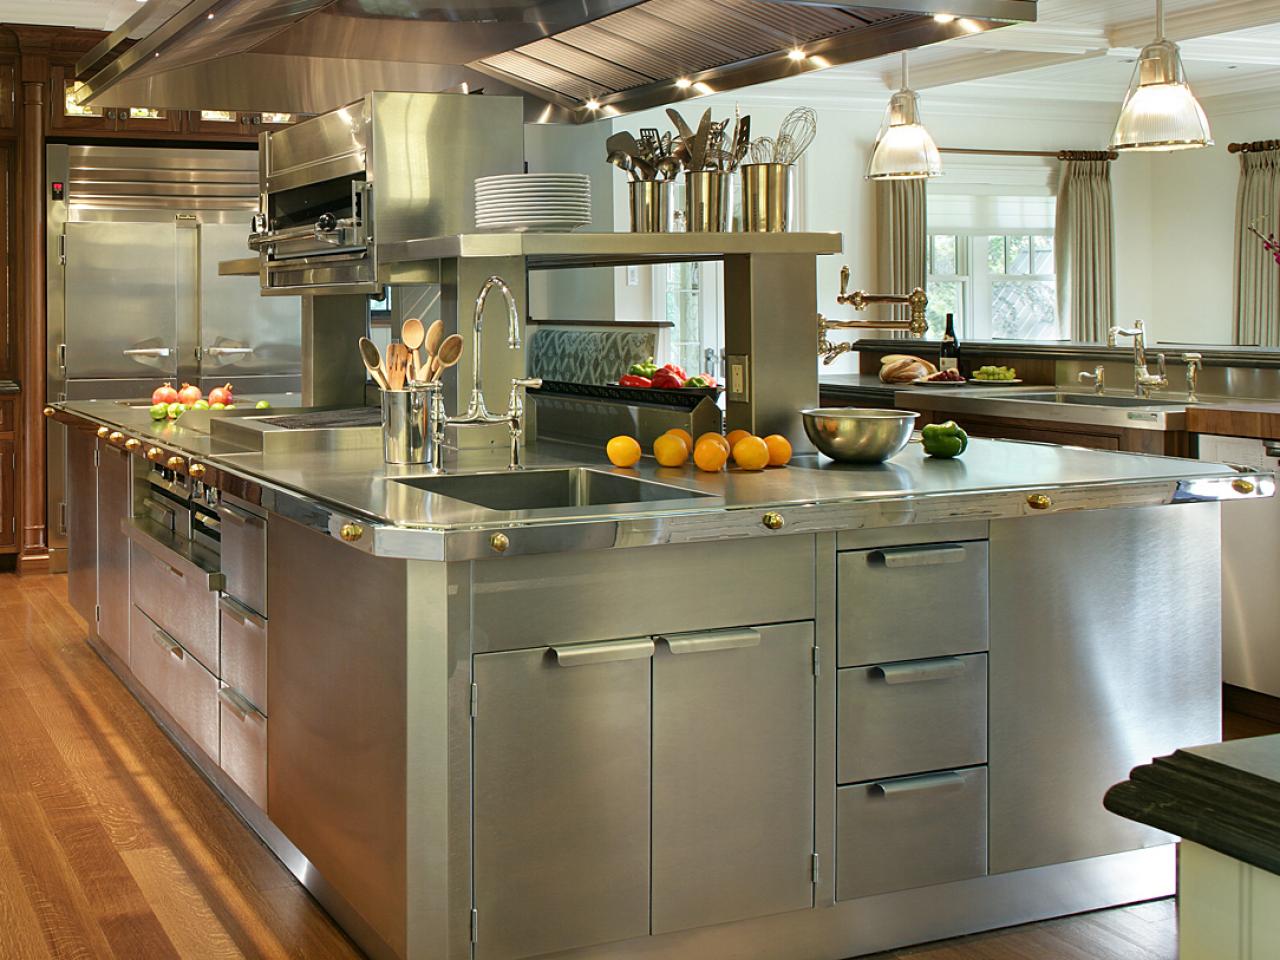 Stainless Steel Kitchen Cabinets: Pictures, Options, Tips & Ideas | HGTV